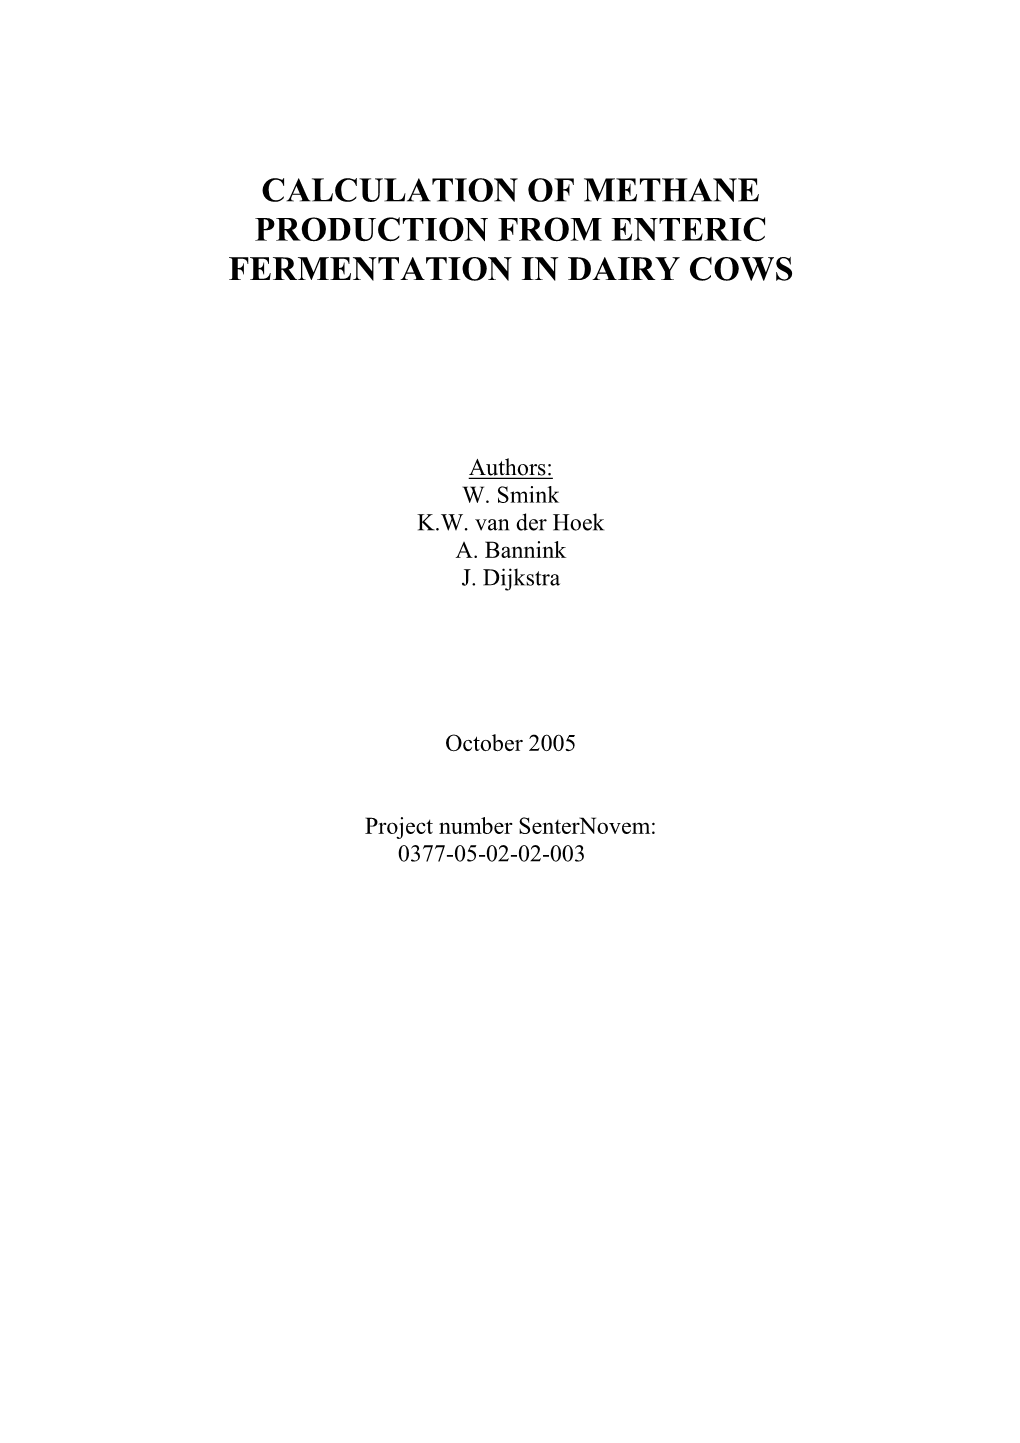 Calculation of Methane Production from Enteric Fermentation in Dairy Cows